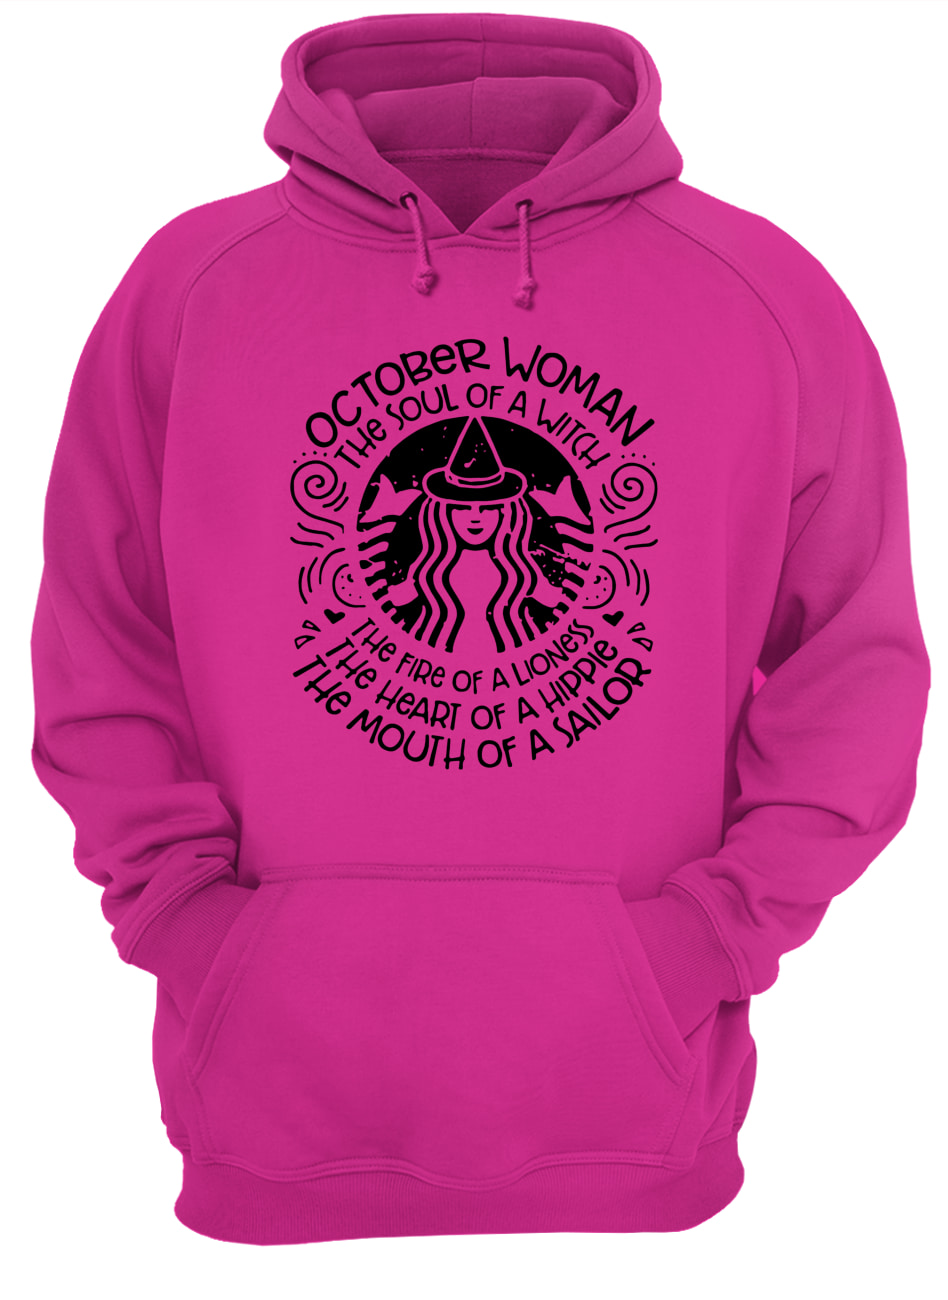 Mermaid october woman the soul of a witch the fire of a lioness hoodie